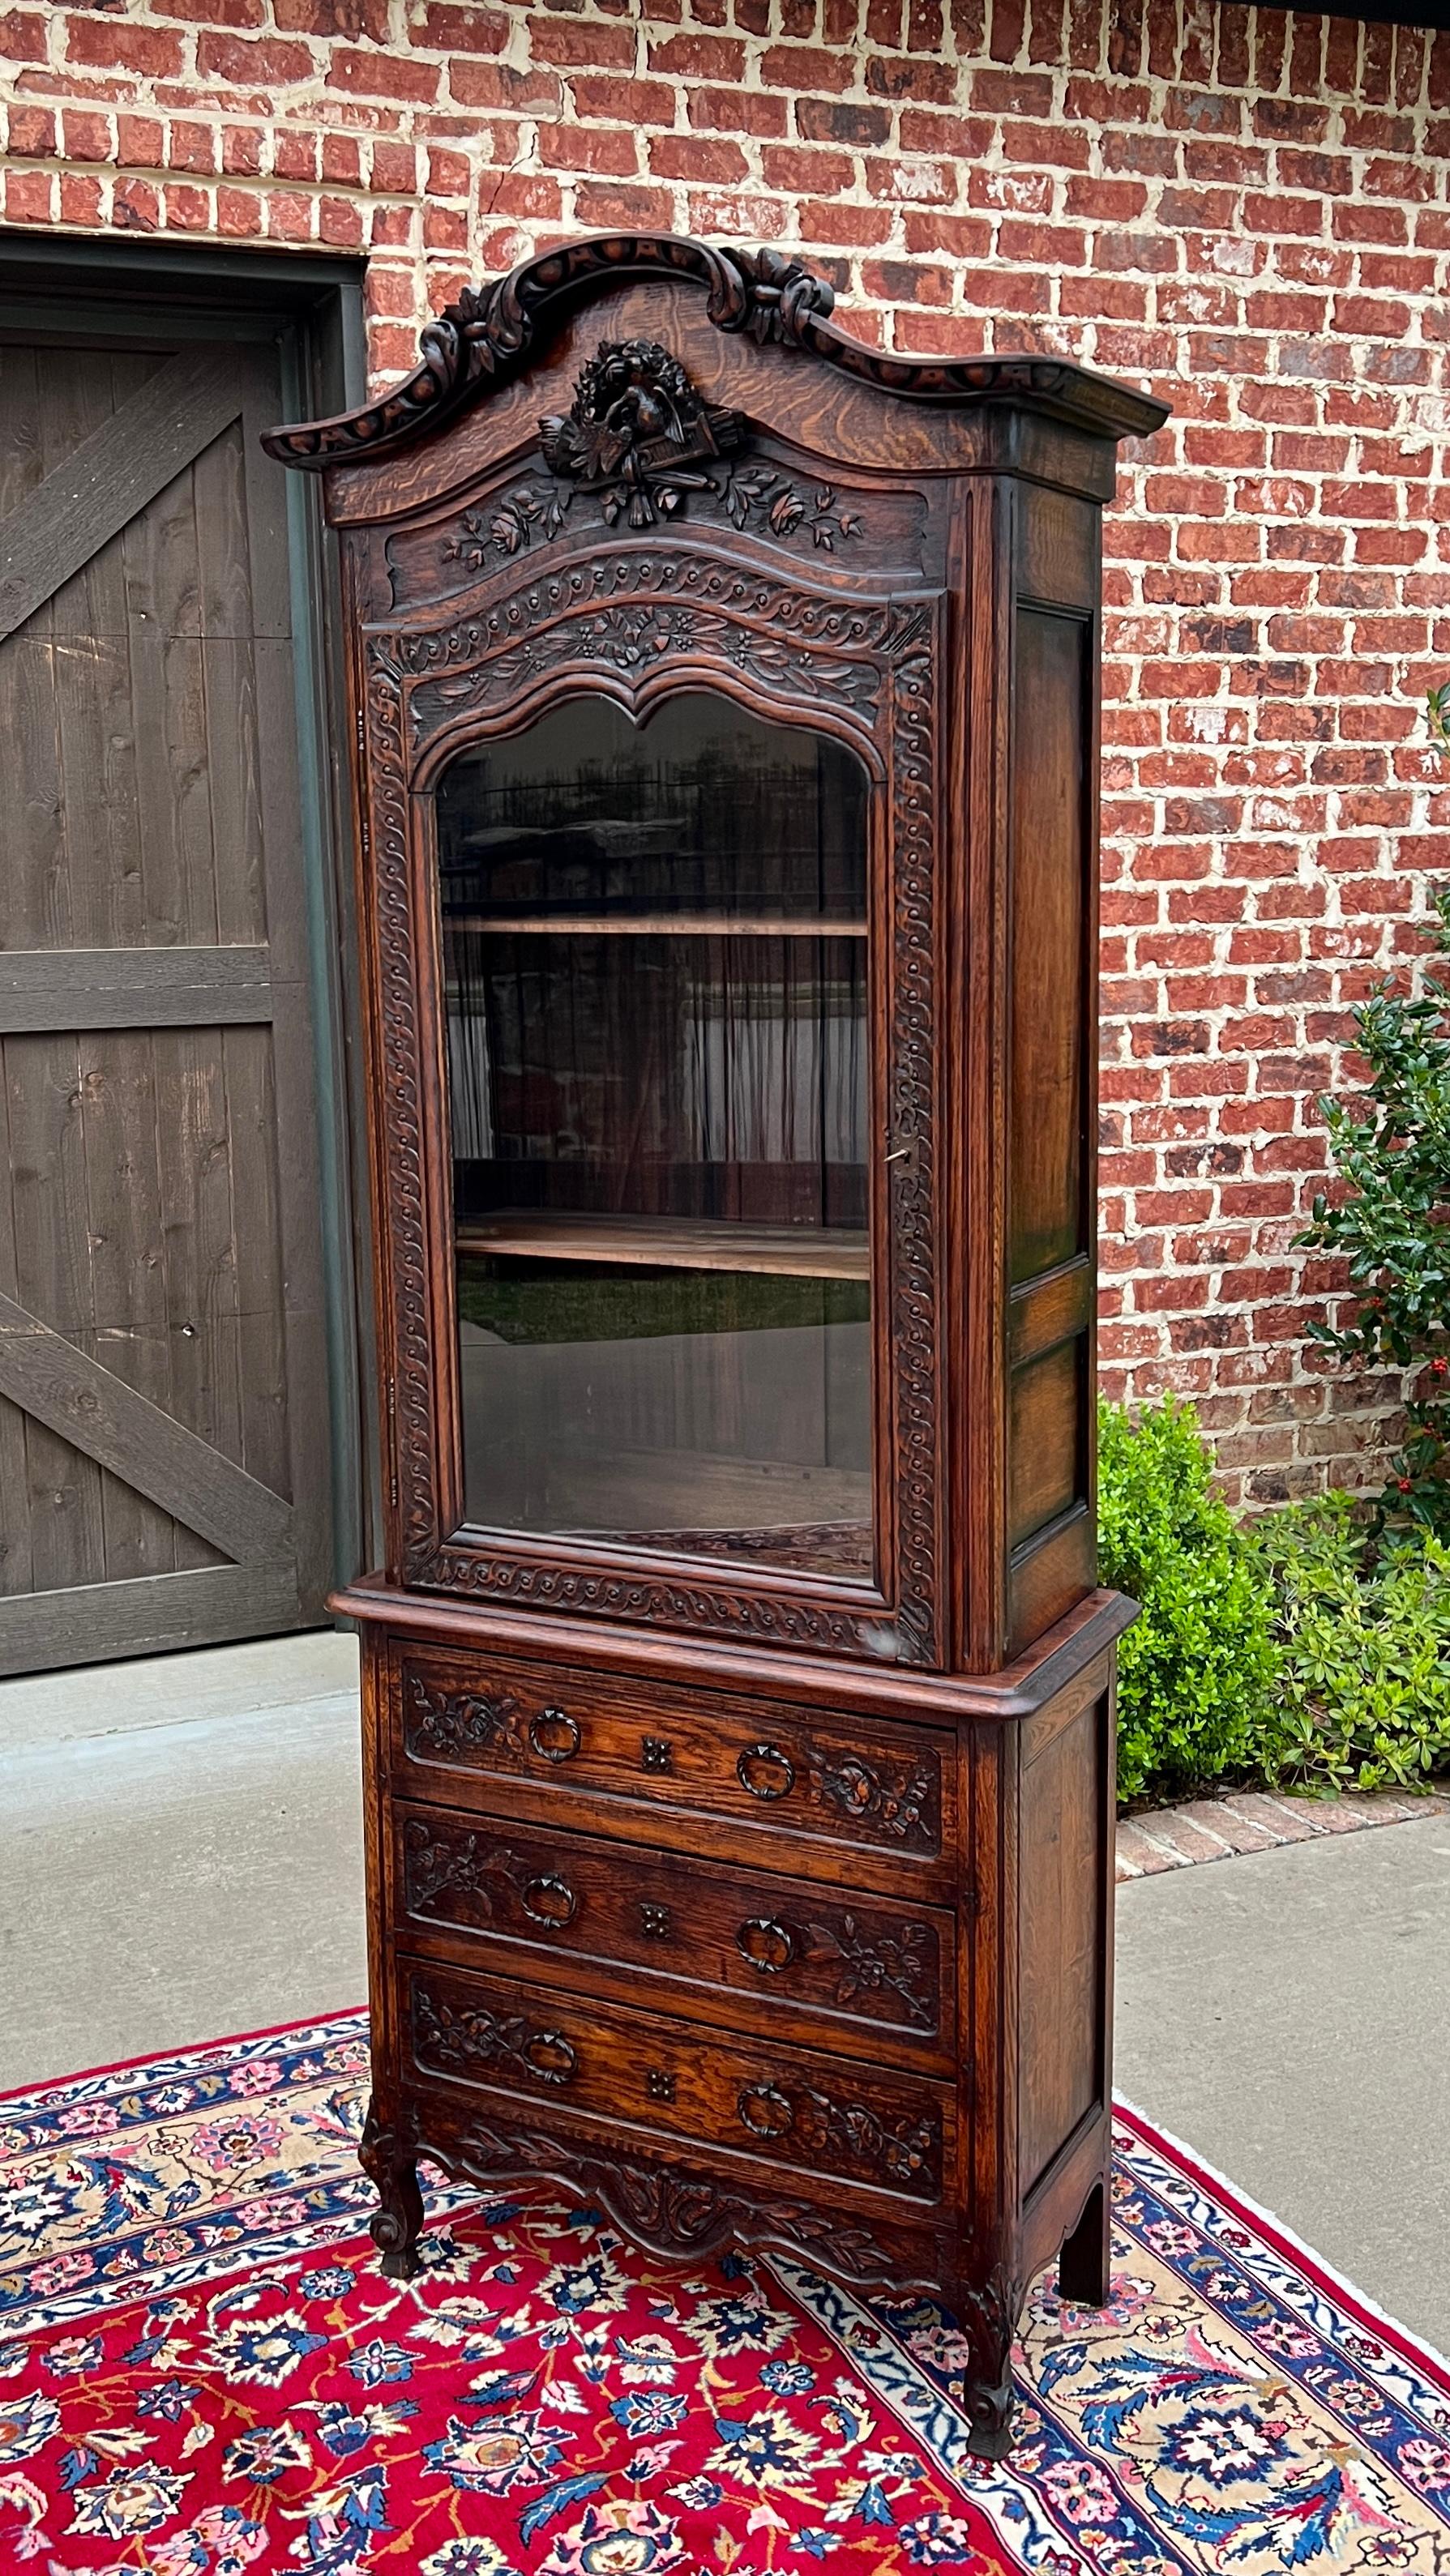 BEAUTIFUL Antique French Country Carved Oak Bonnet Top Bookcase, Bonnetiere or Vitrine Over 3 Drawer Chest ~~HIGHLY CARVED~~c. 1870s

Versatile size~~SLIM profile fits in smaller spaces~~84